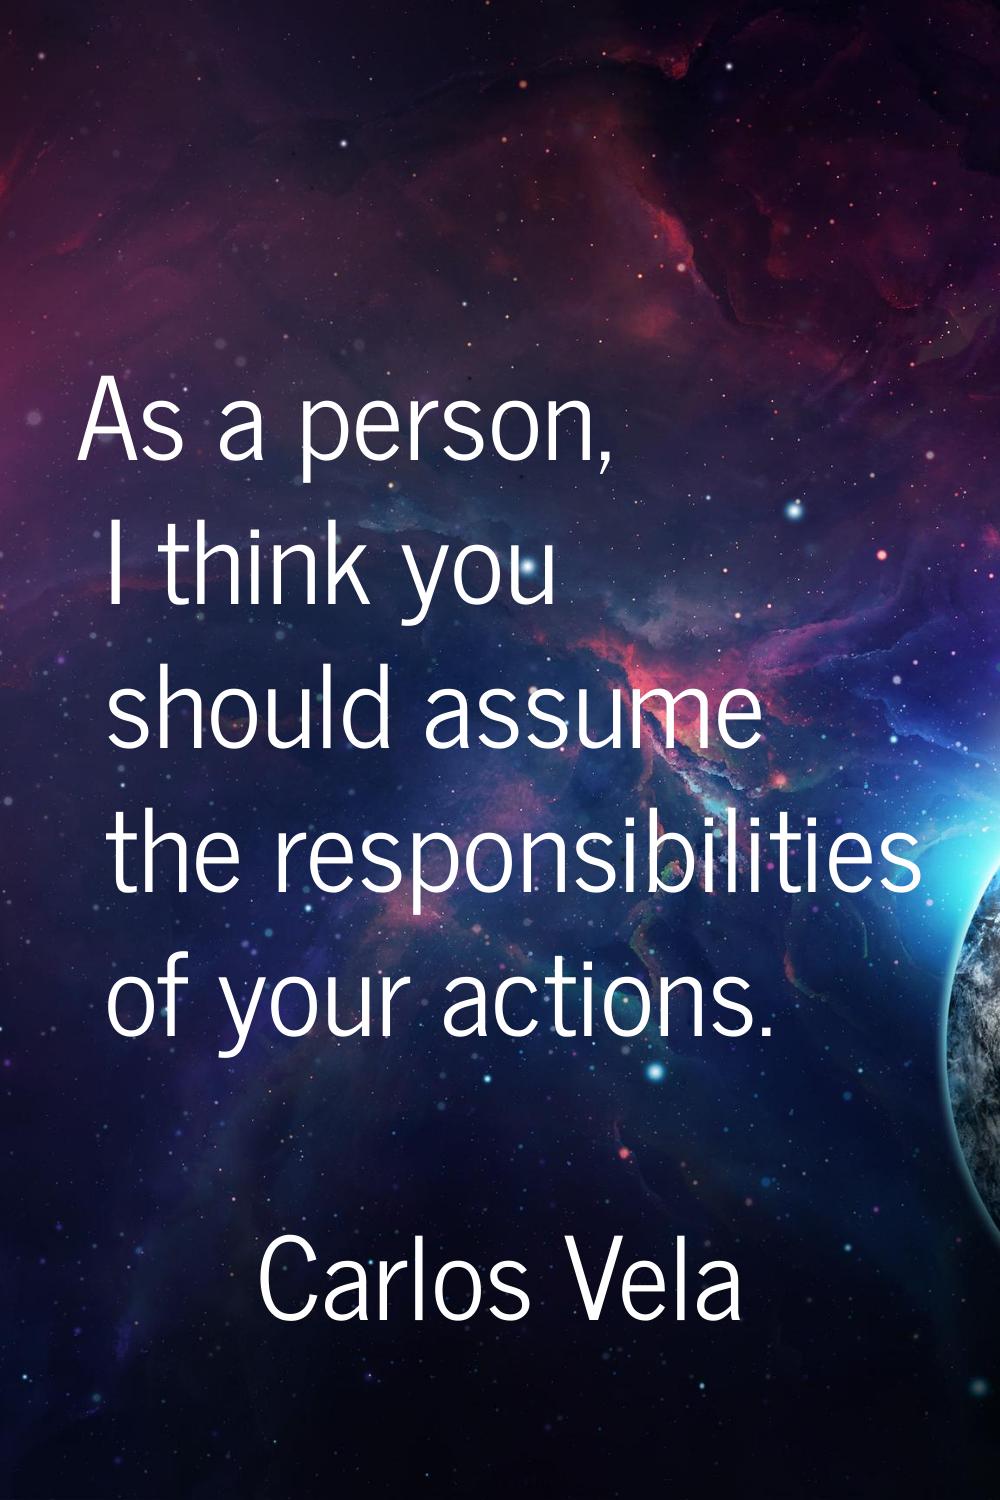 As a person, I think you should assume the responsibilities of your actions.